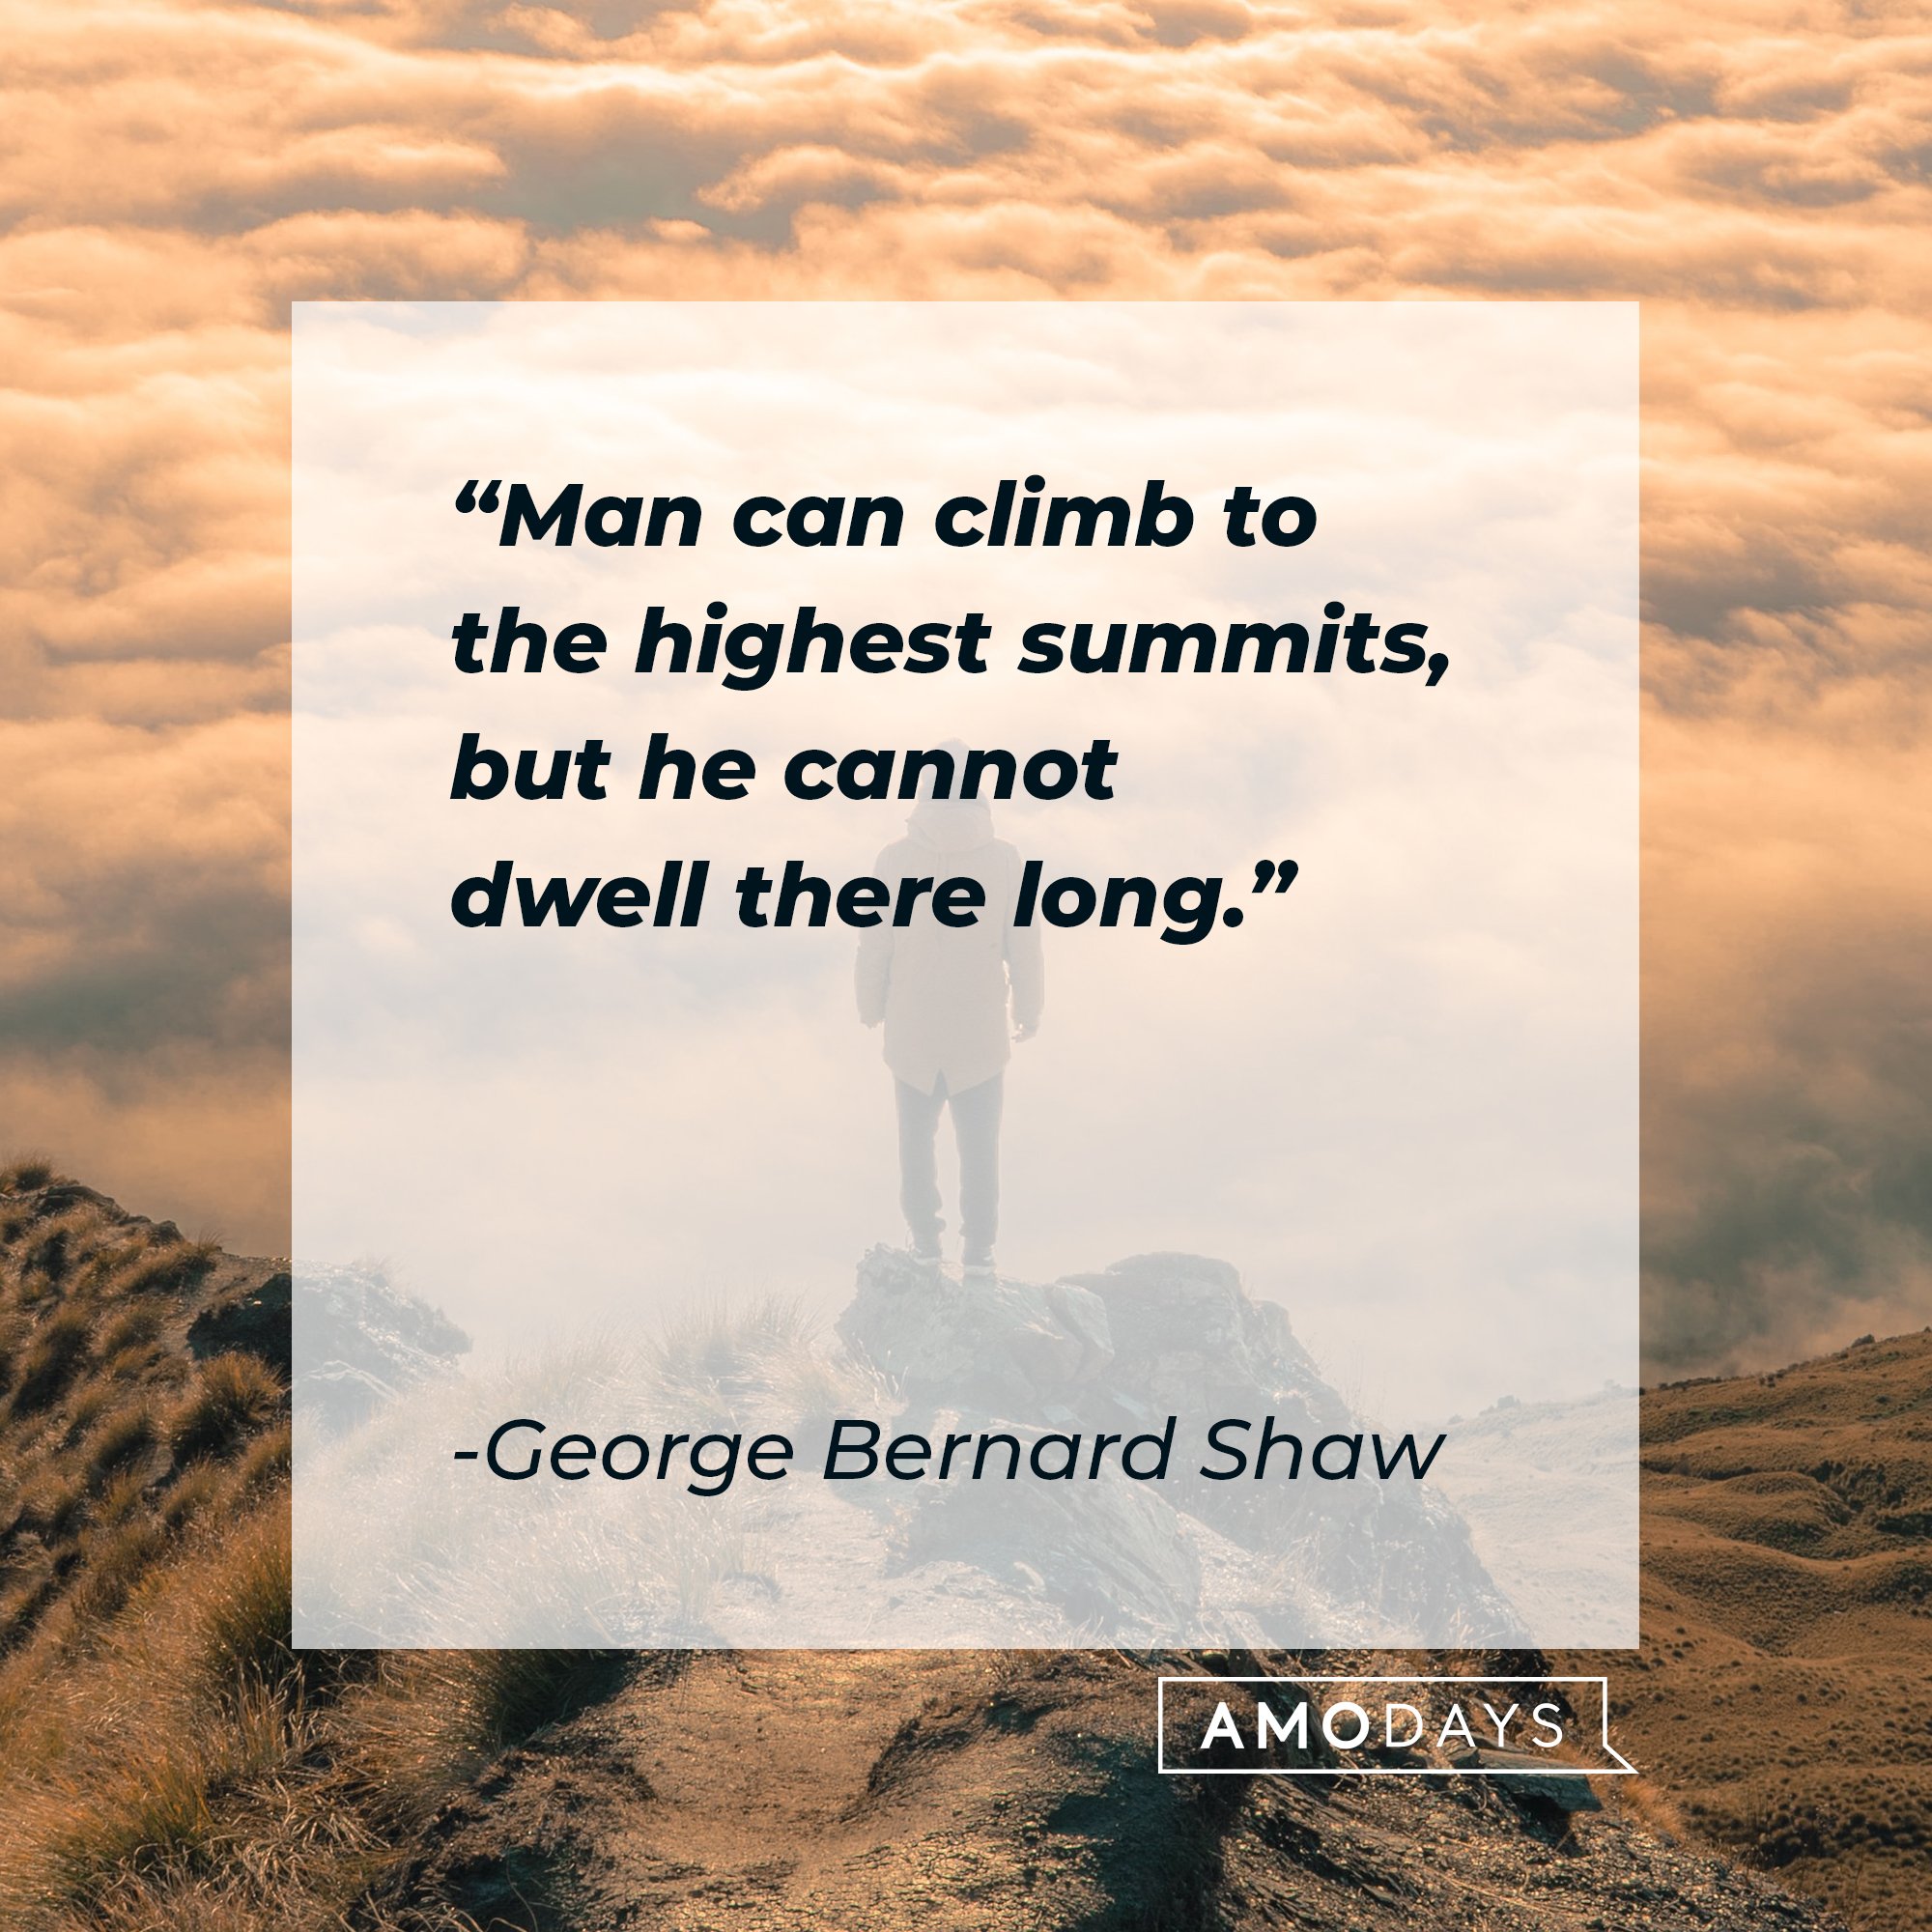 George Bernard Shaw’s quote: "Man can climb to the highest summits, but he cannot dwell there long." | Image: AmoDays